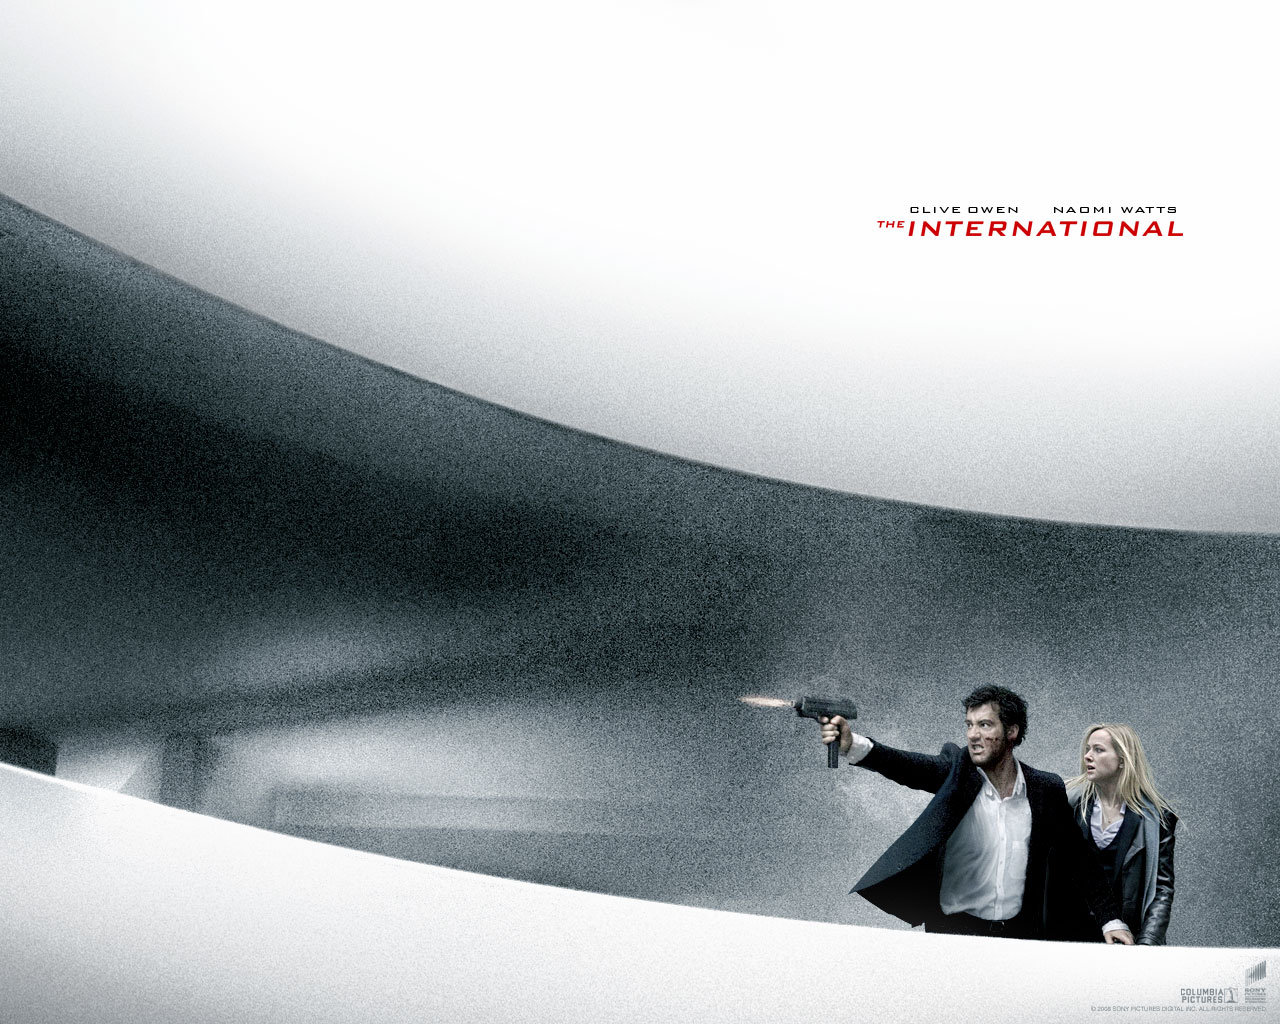 Wallpapers The International Movies Image #119864 Download